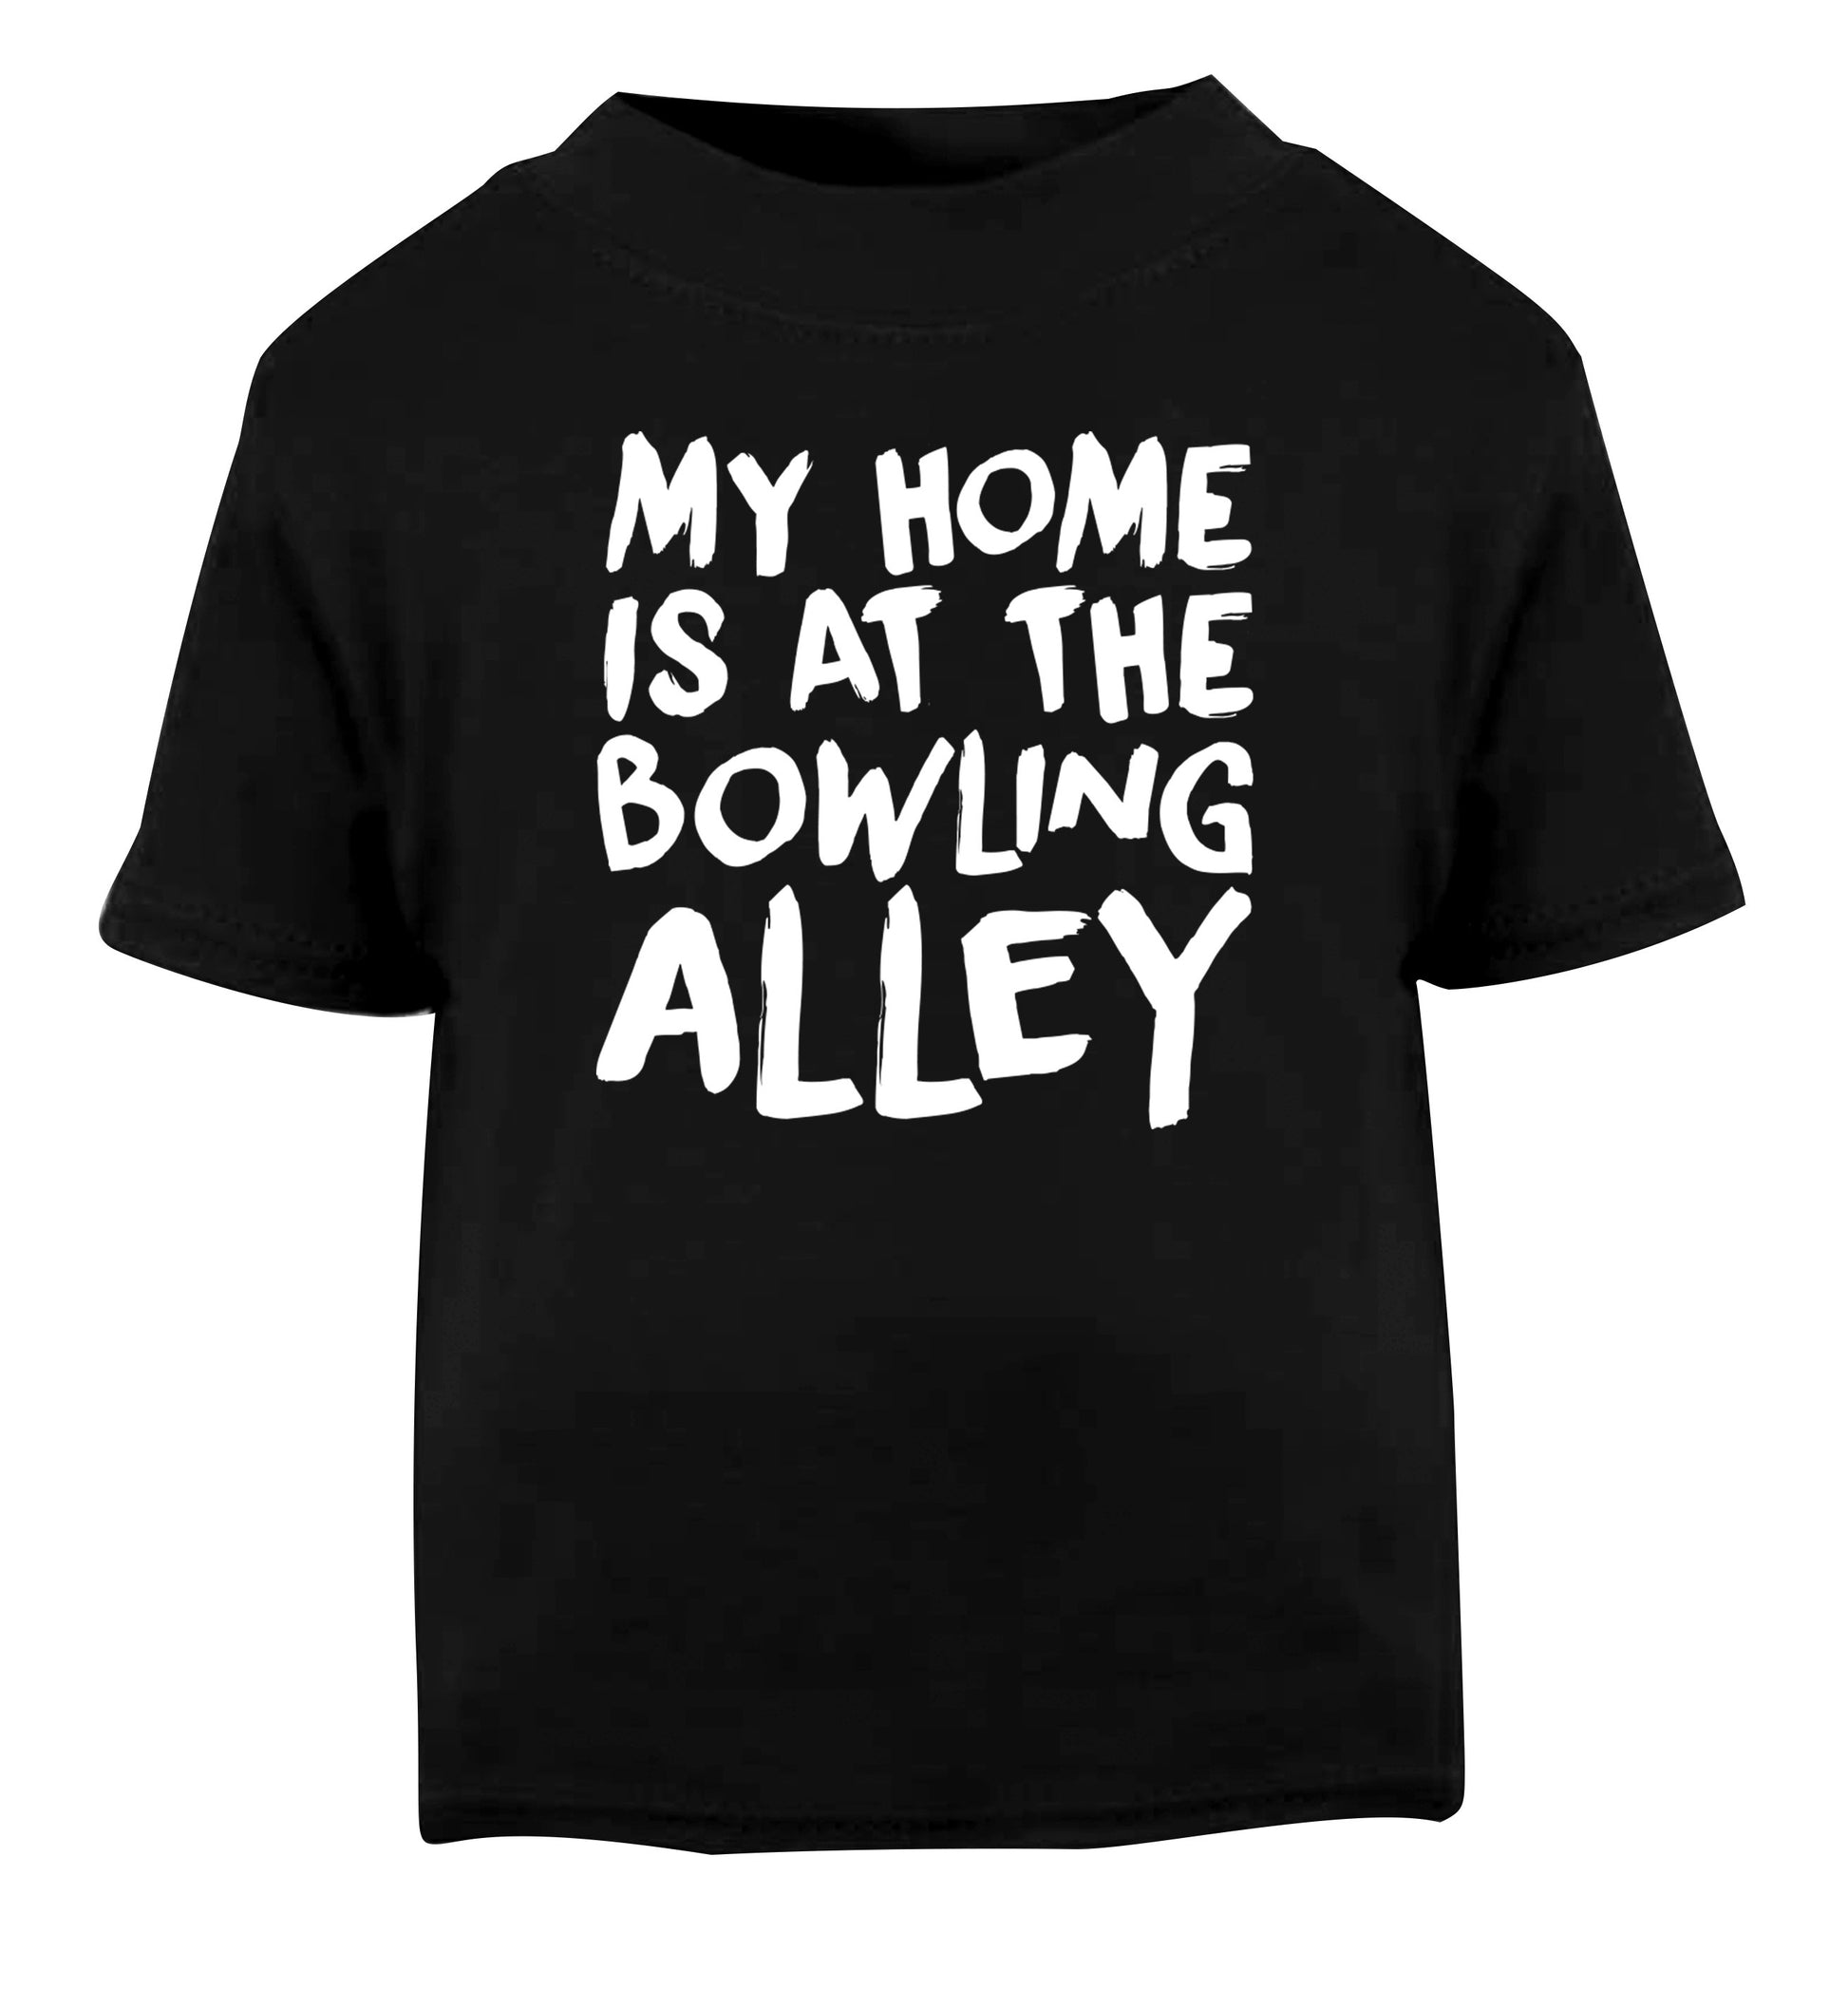 My home is at the bowling alley Black Baby Toddler Tshirt 2 years